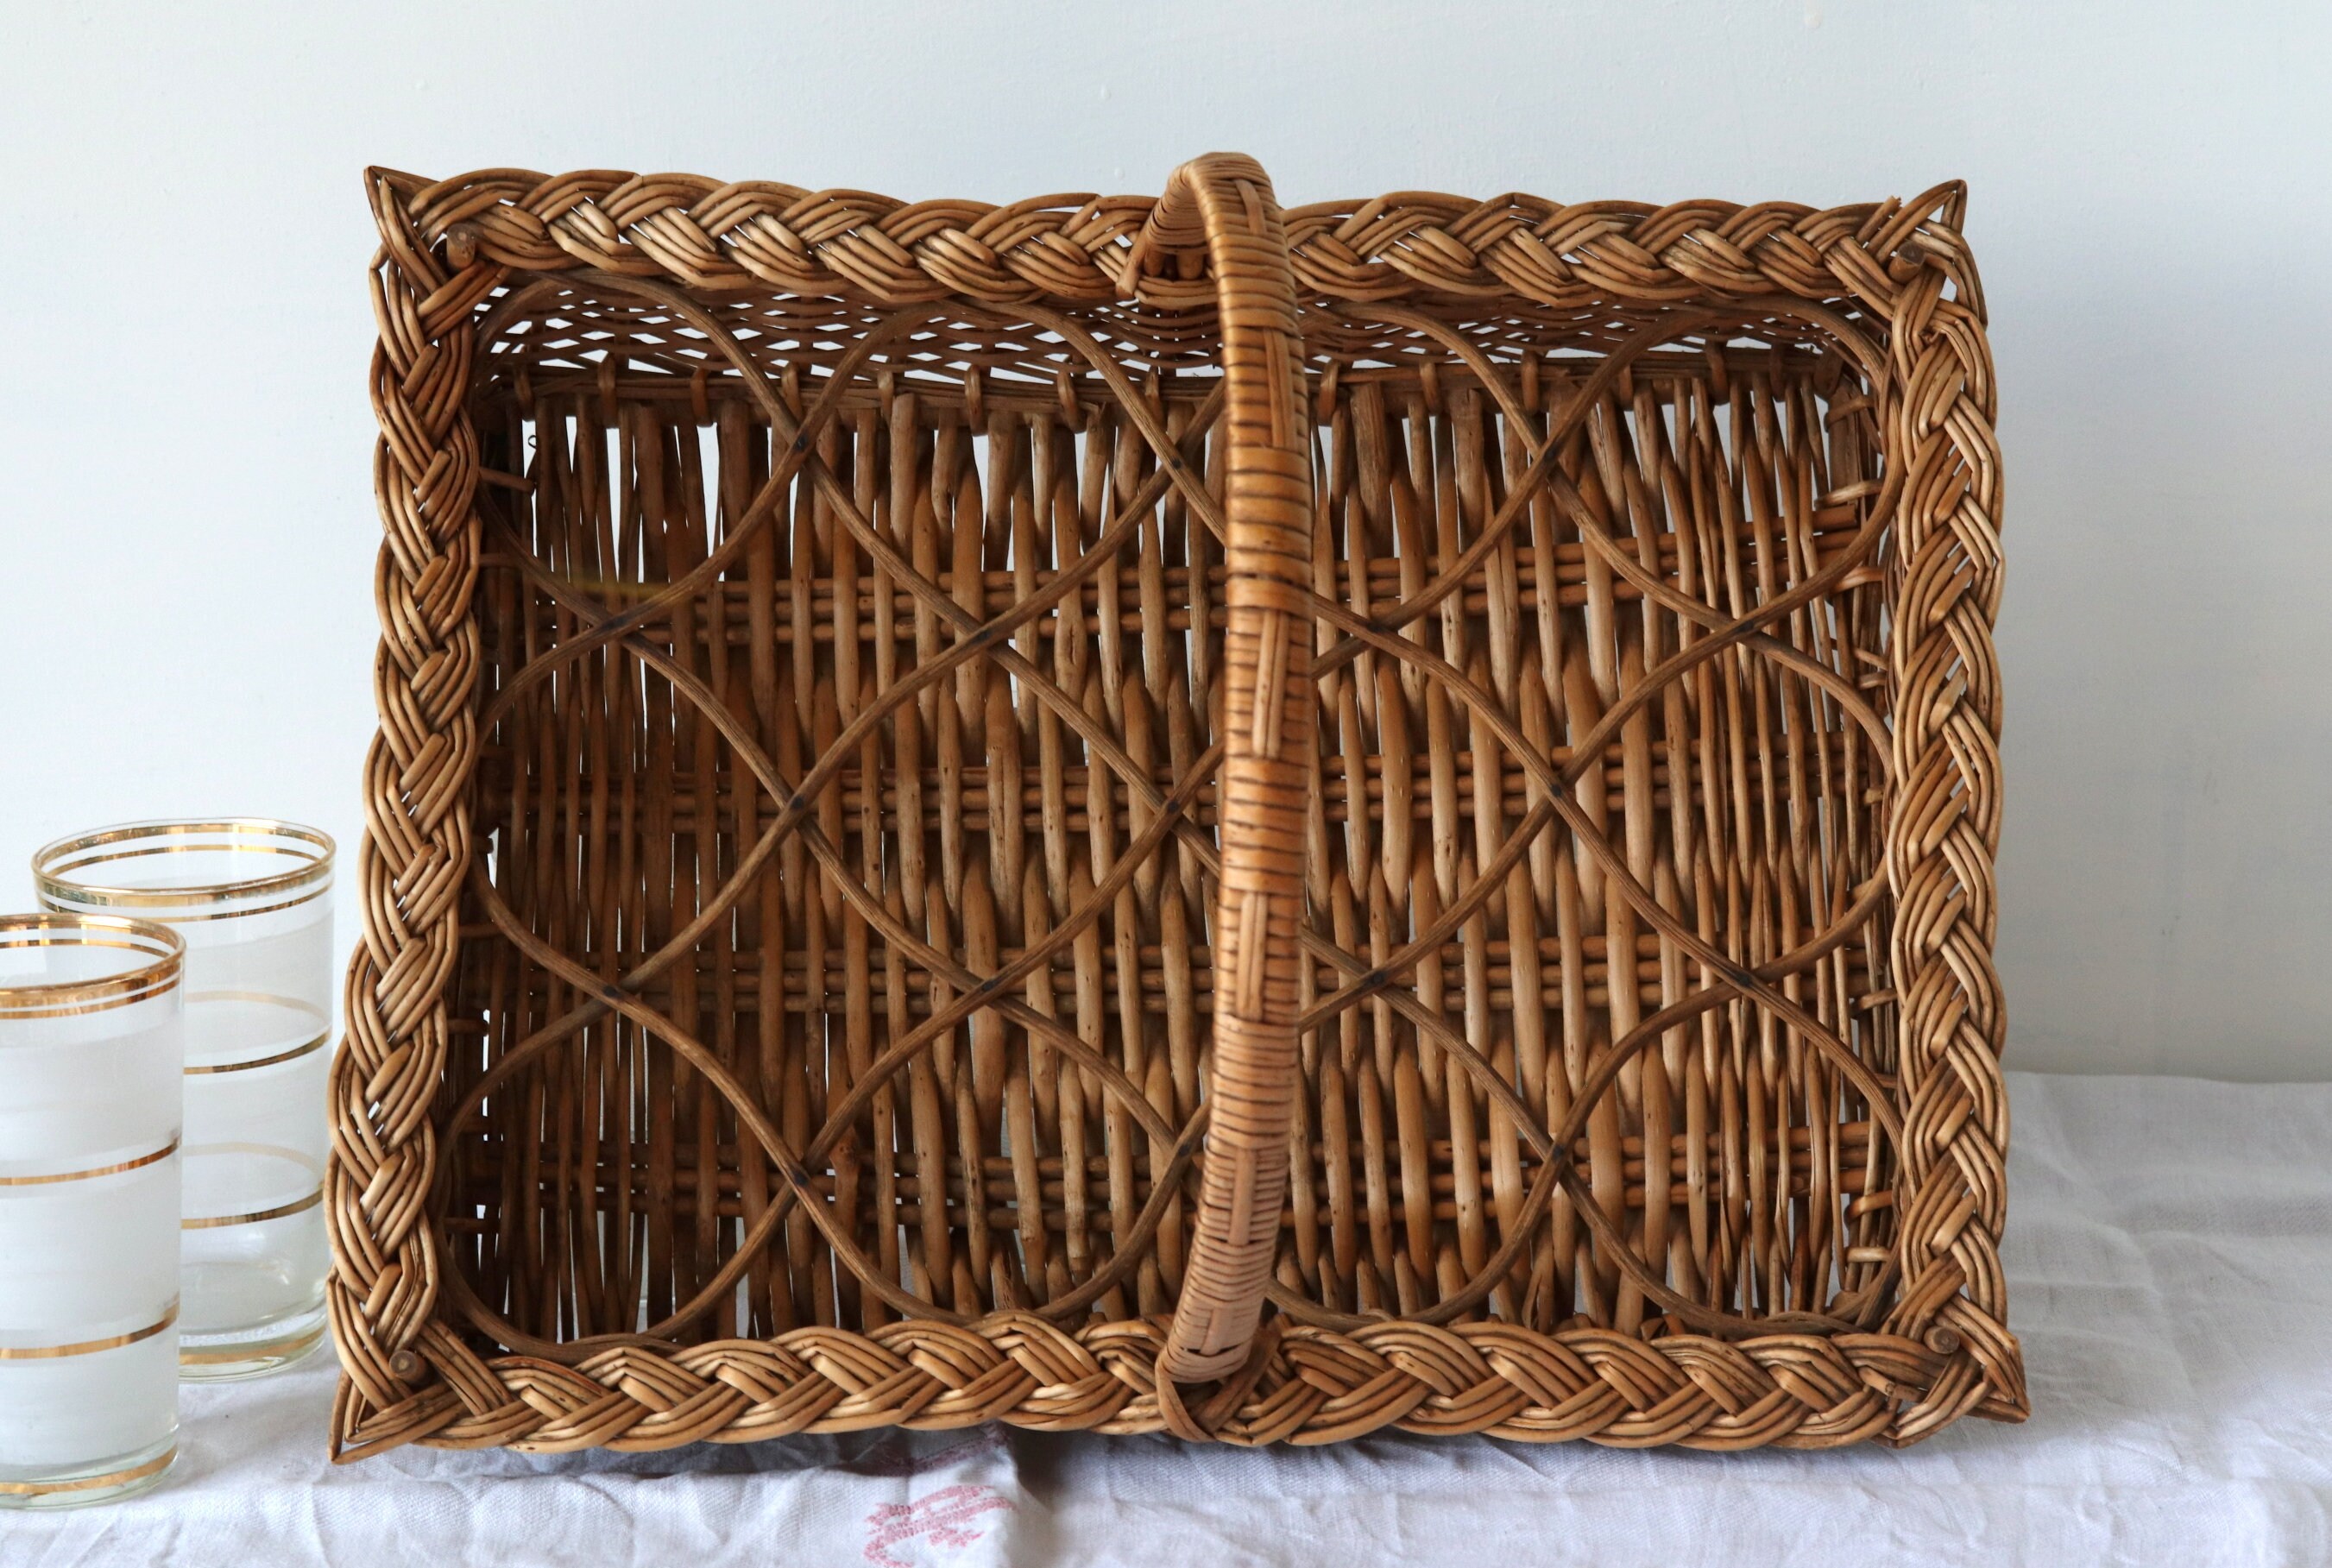 Footed Woven Basket With Dividers